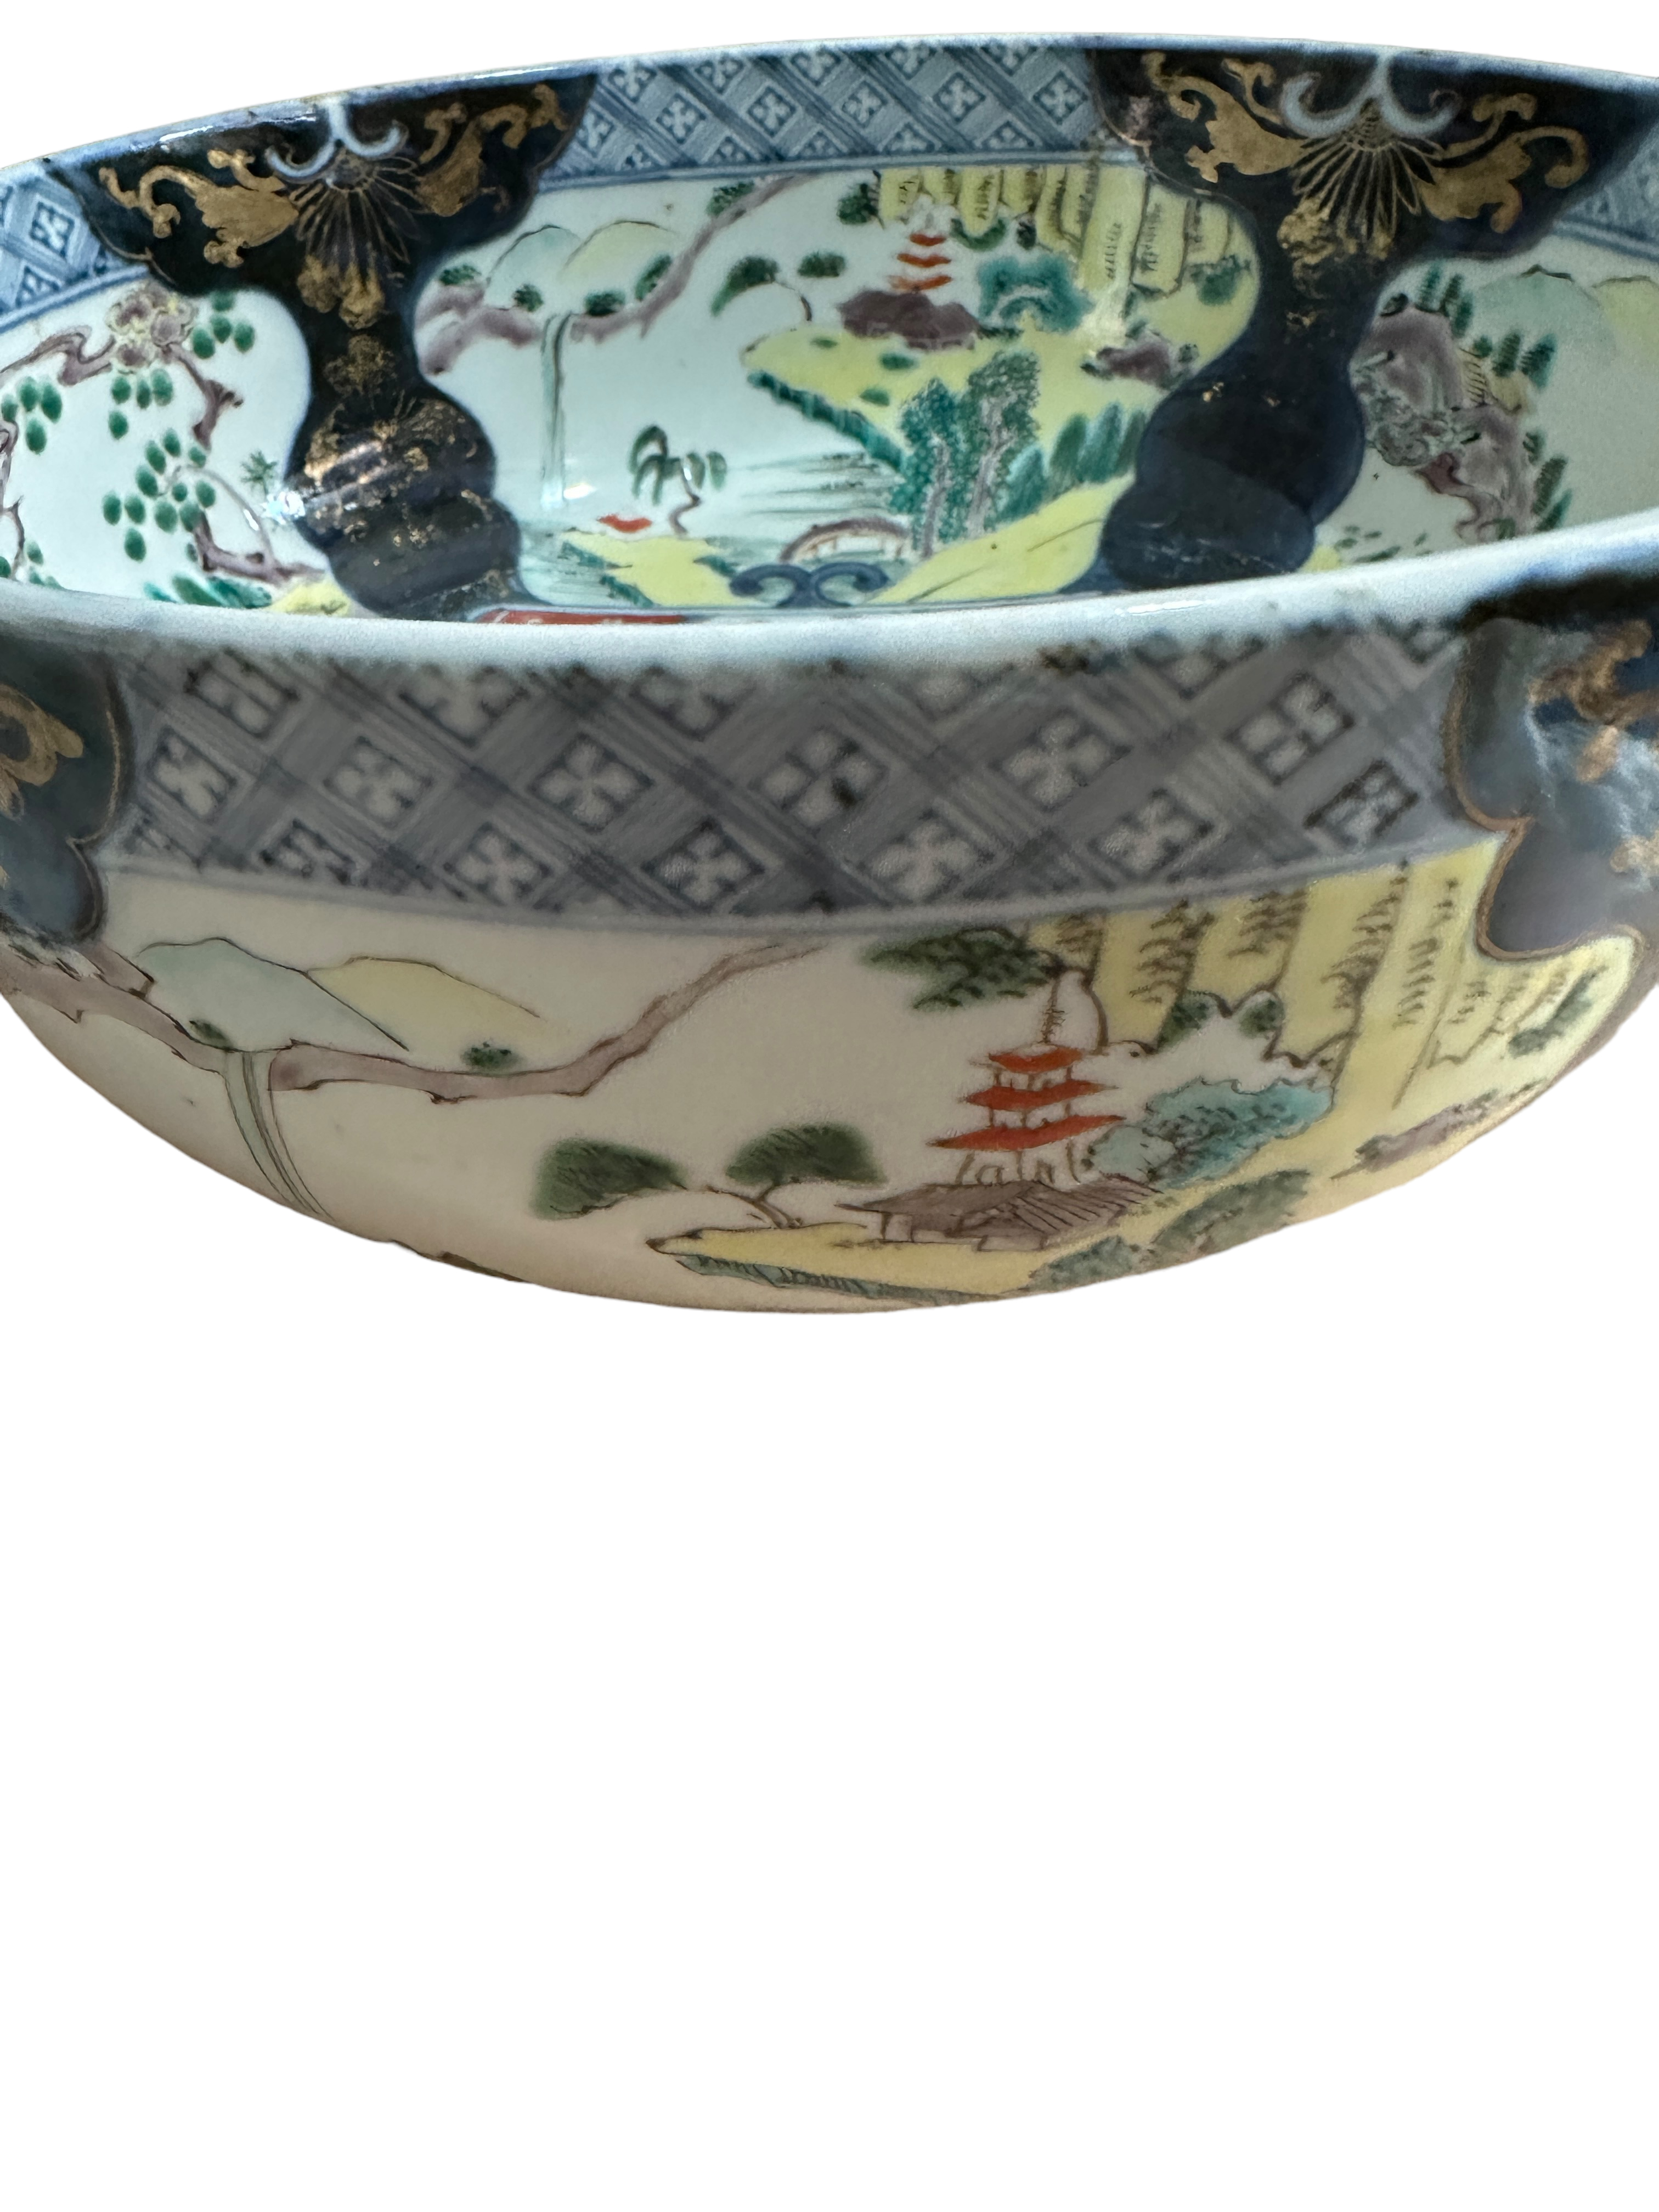 Large Antique Oriental Bowl - 25.5cm diameter and 11.5cm tall. - Image 4 of 8